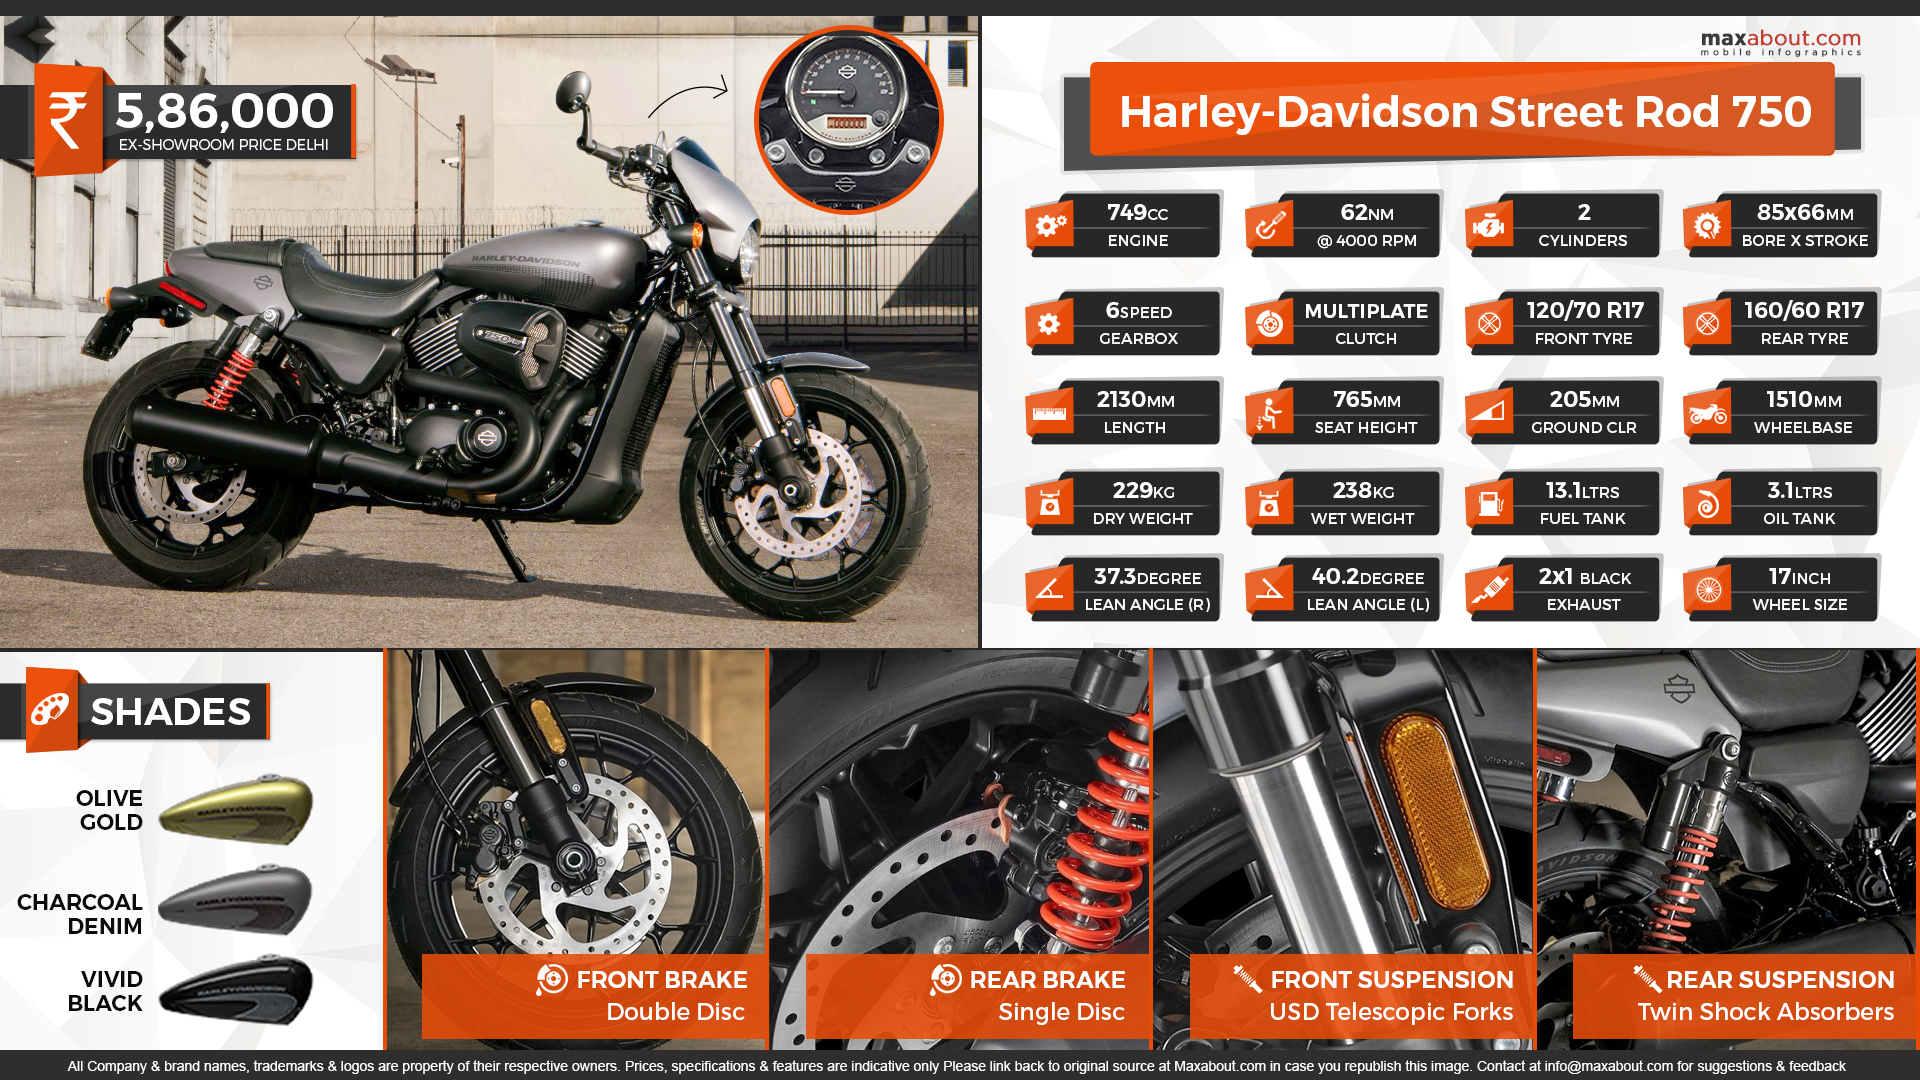 Quick Facts About Harley Davidson Street Rod 750